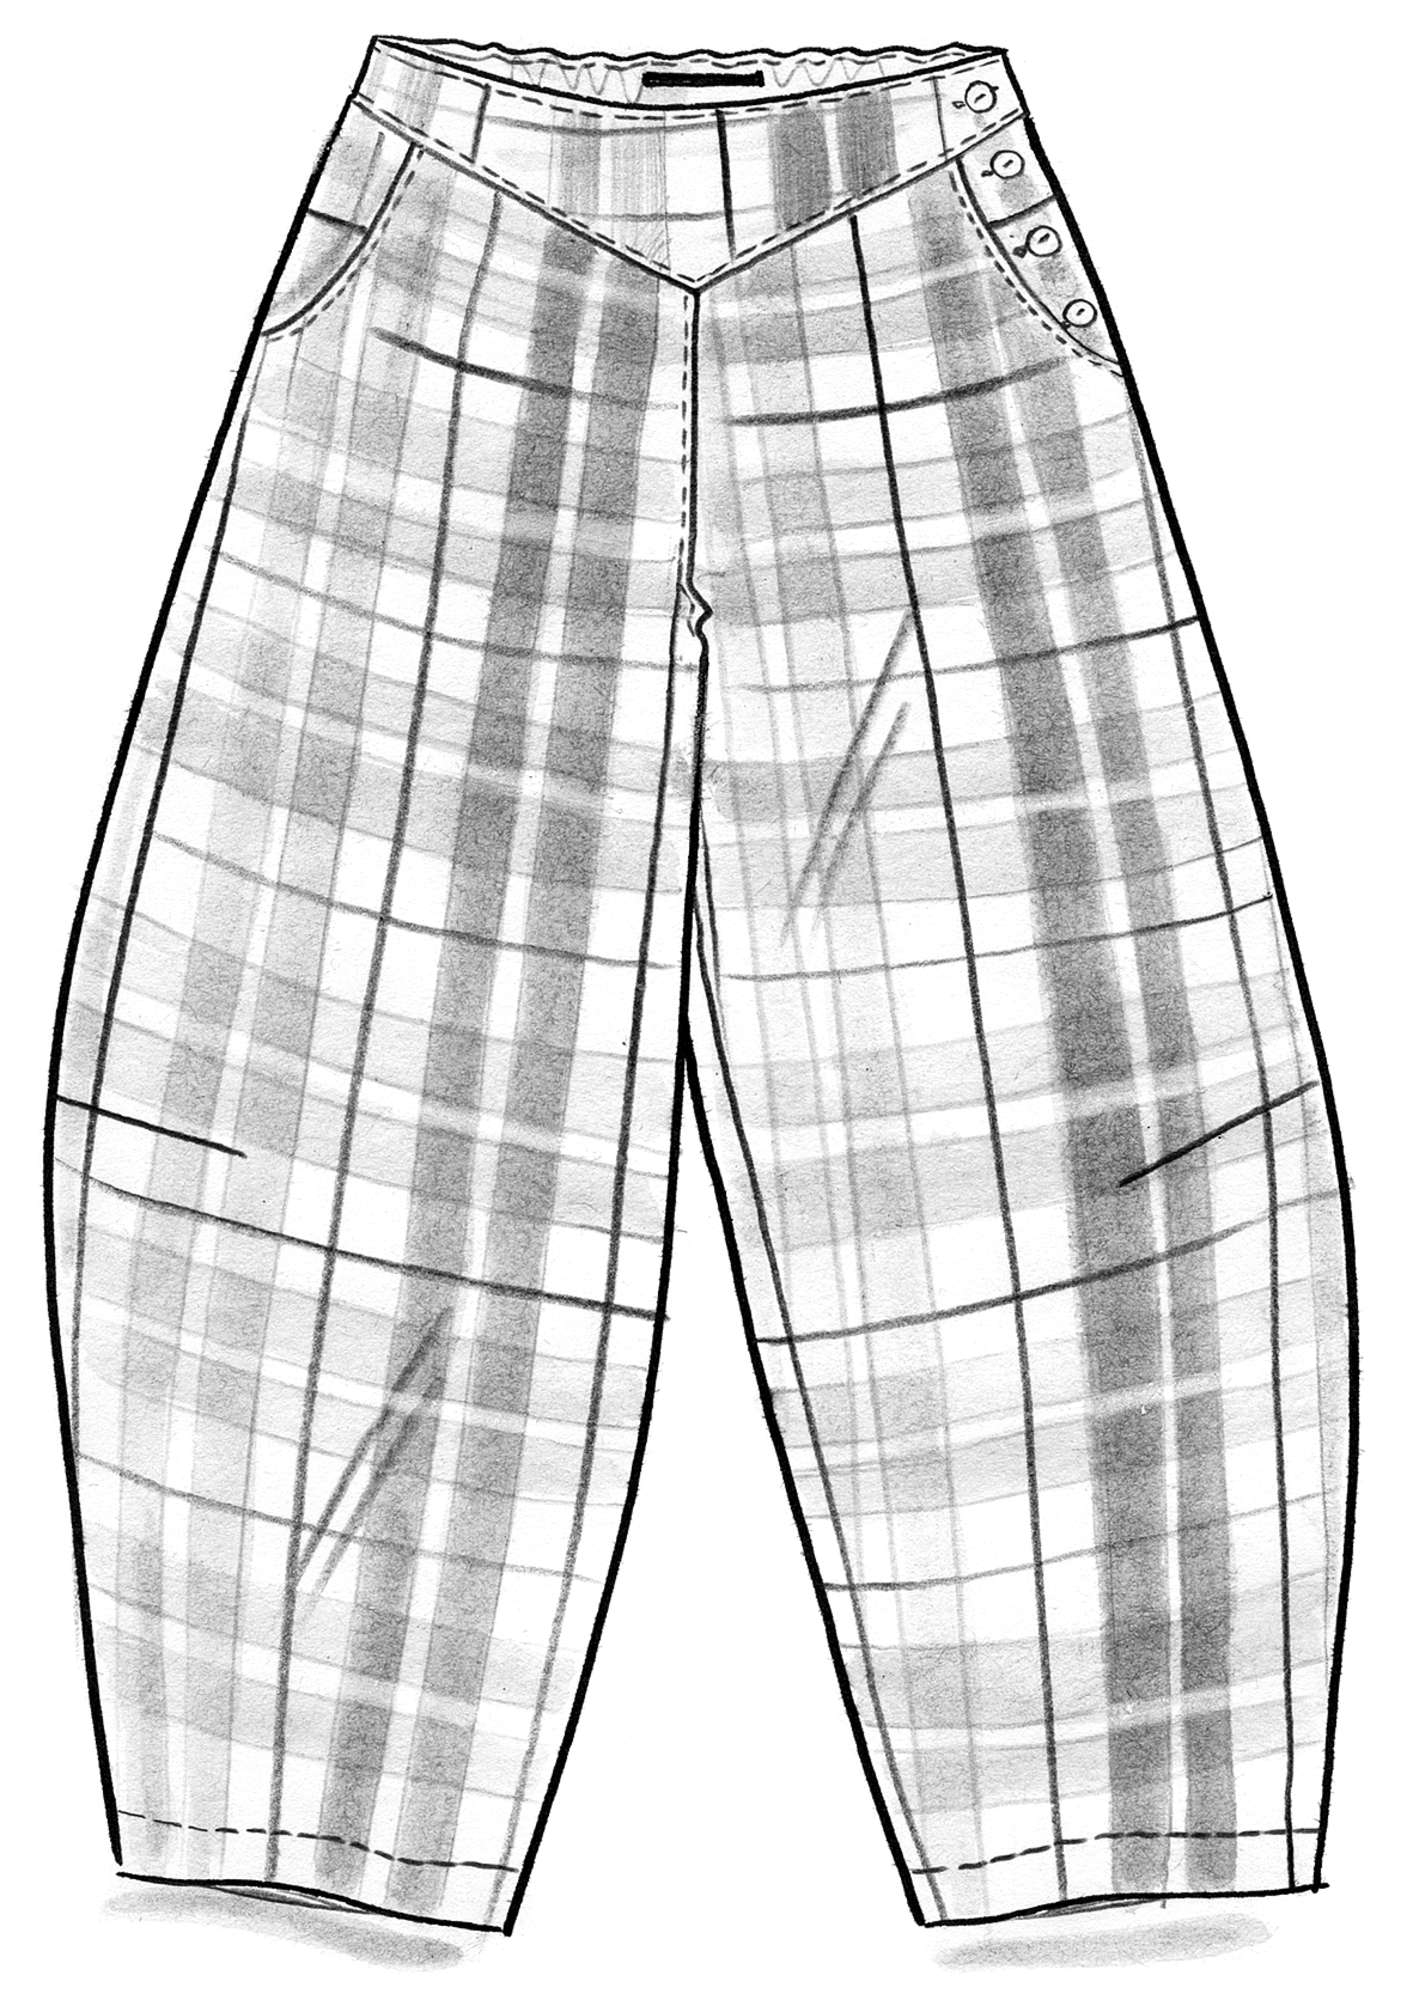 Trousers in a woven cotton/linen blend